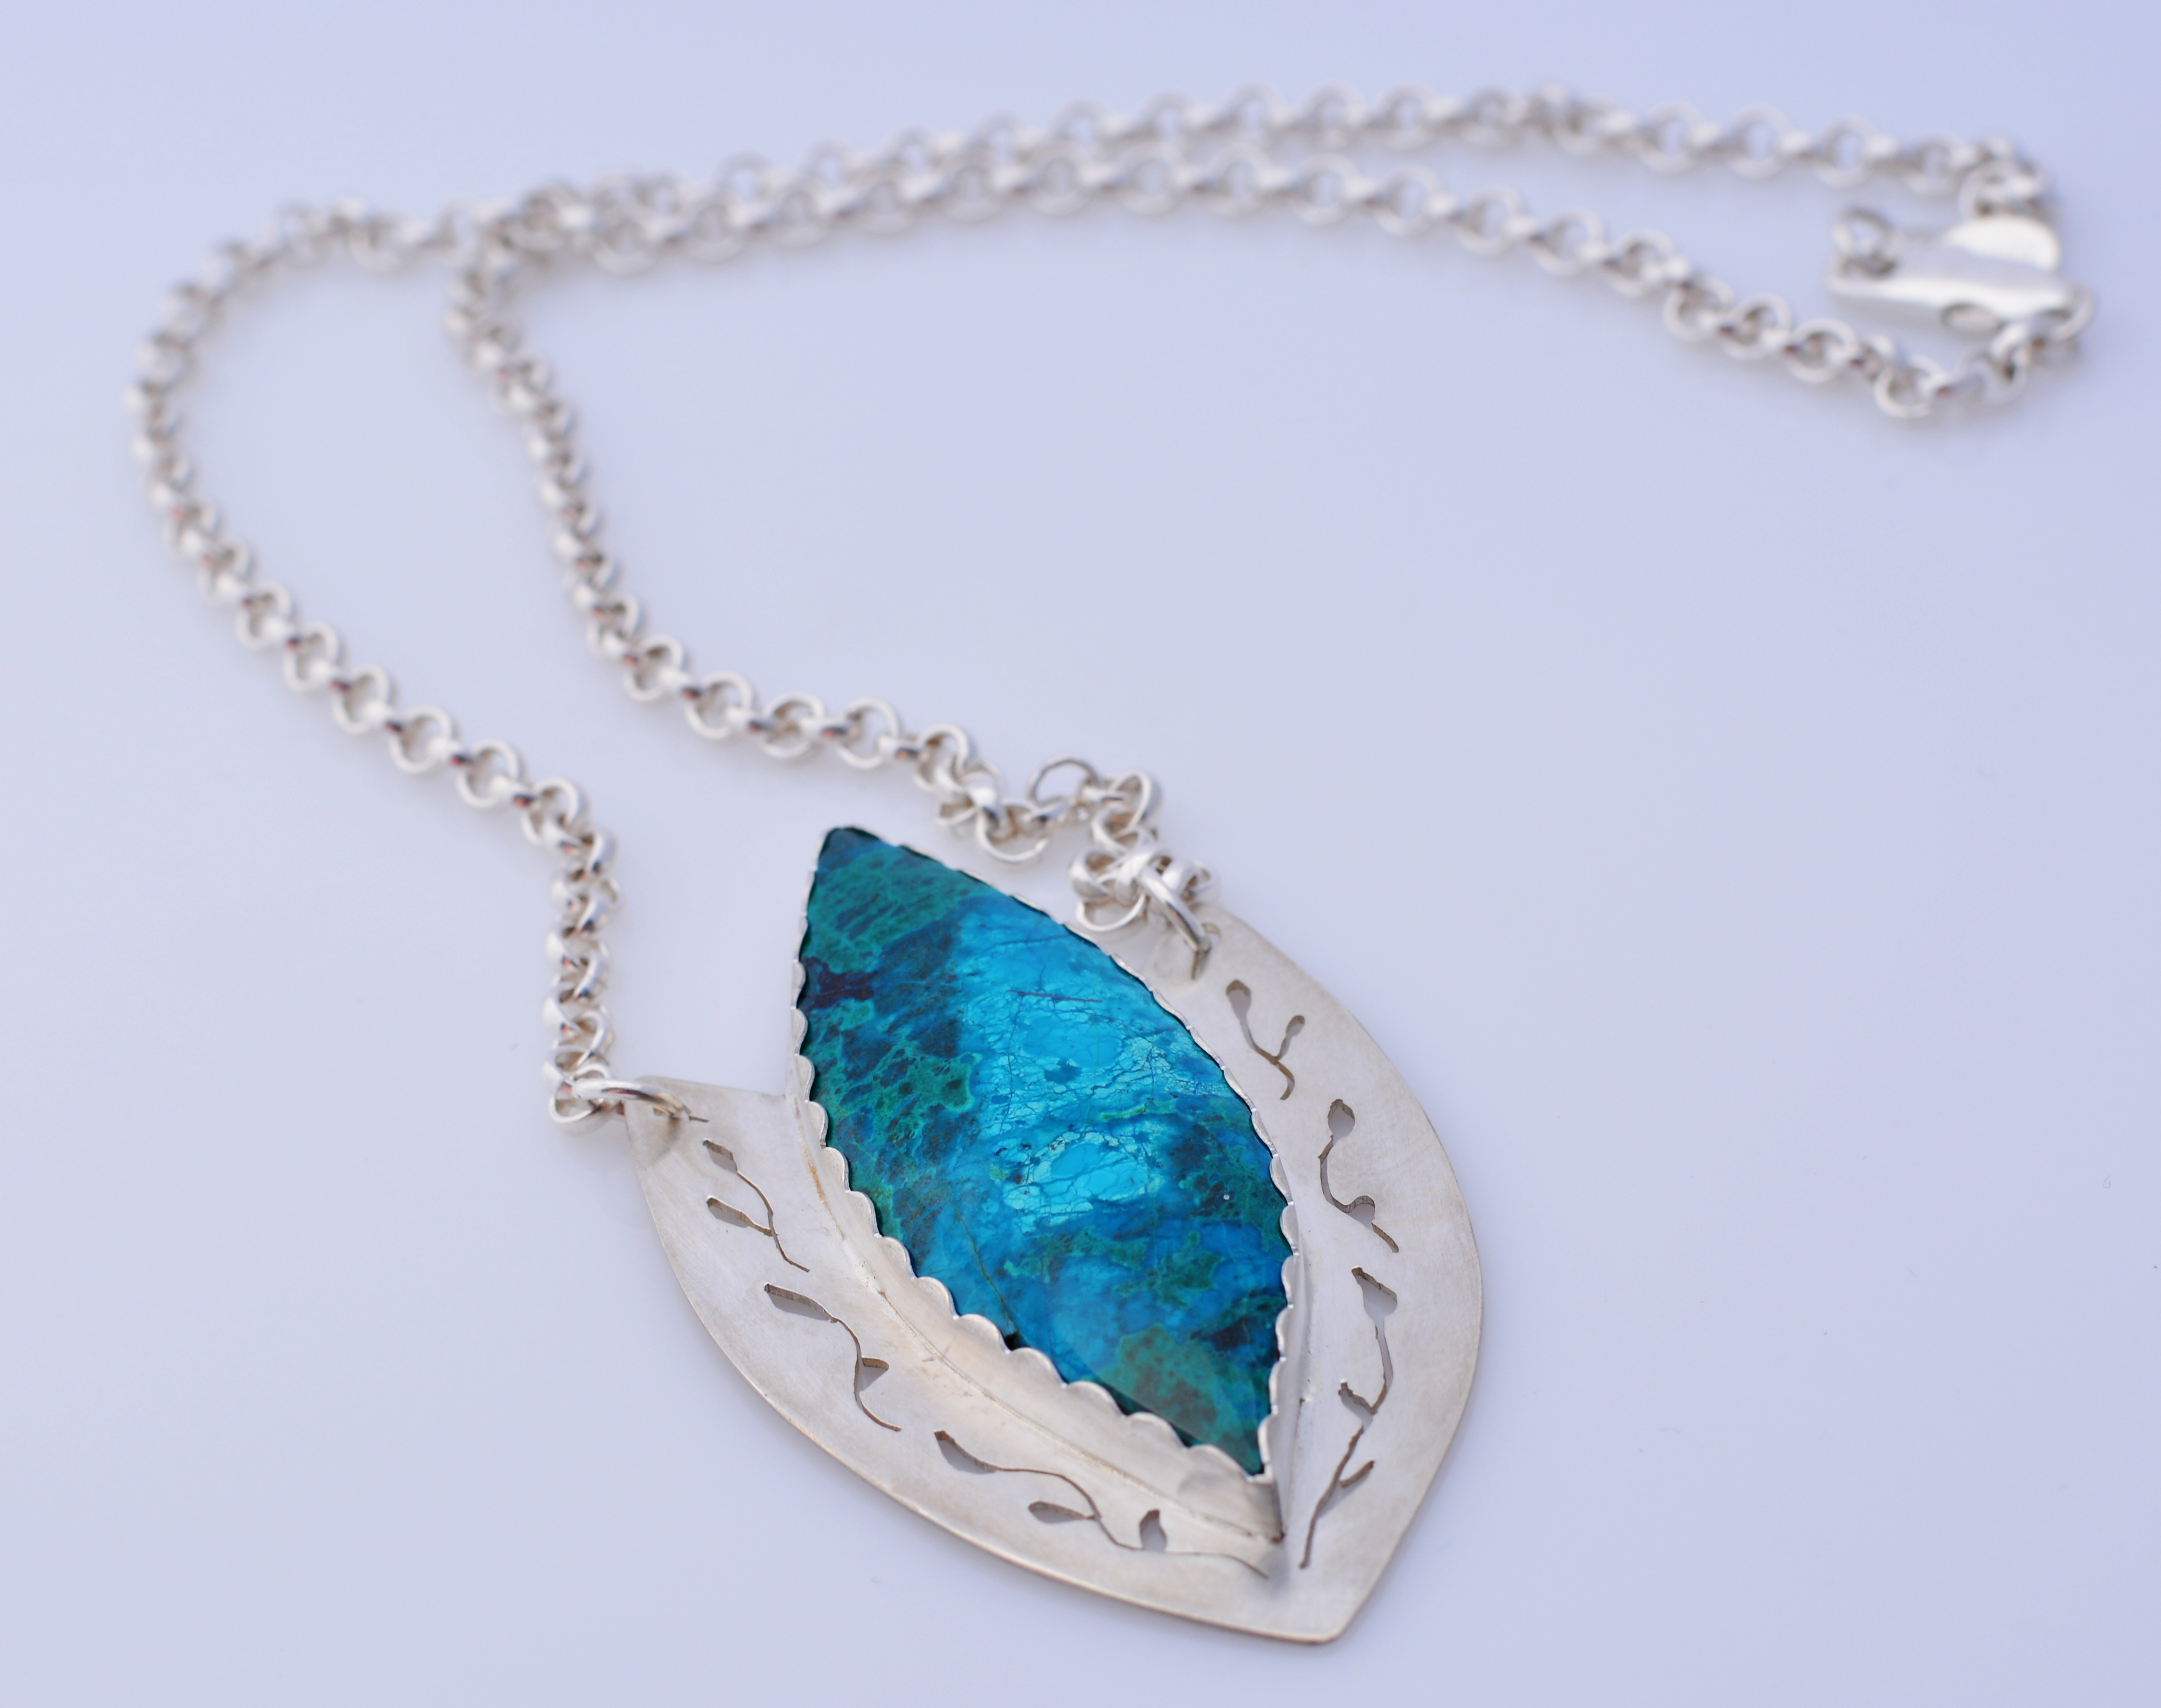 Blue Bird Mine Chrysocolla set in sterling silver pendant represents Kelp Forest in Monterey Bay